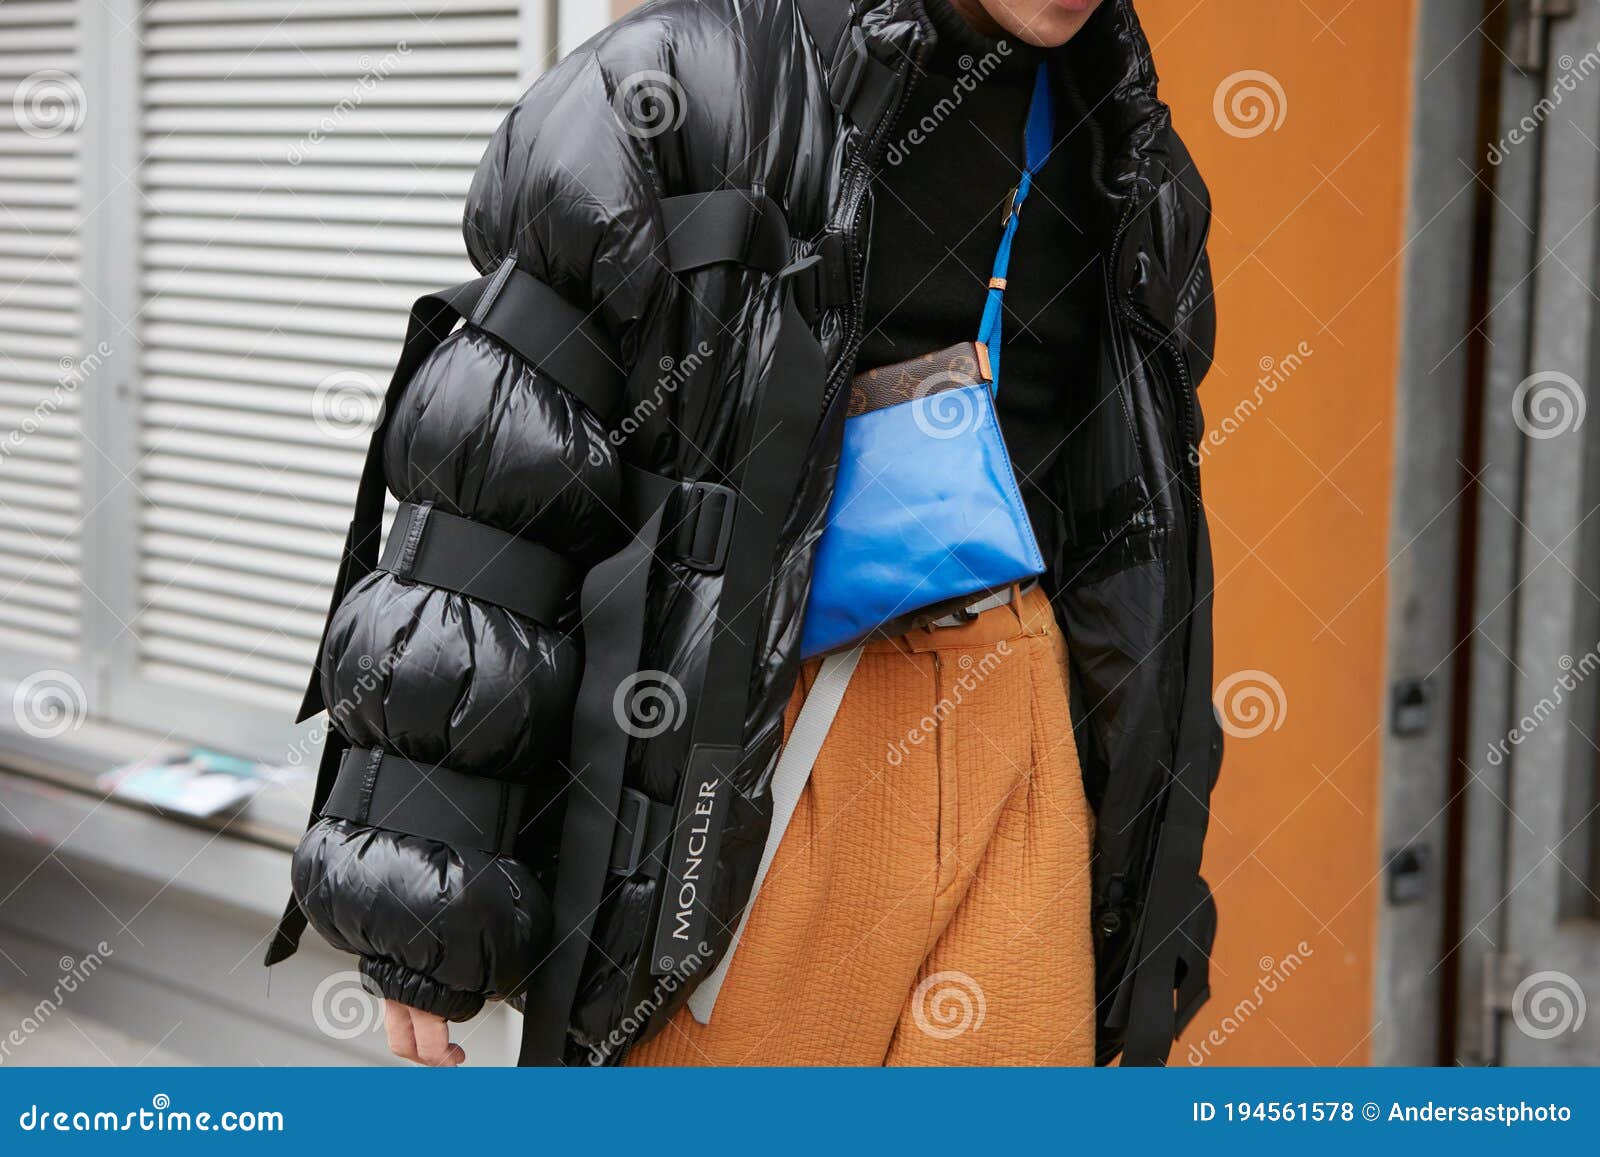 Man with Black Moncler Padded Jacket, Yellow Trousers and Blue Louis Vuitton  Bag before Giorgio Armani Fashion Editorial Stock Photo - Image of people,  outdoor: 194561578